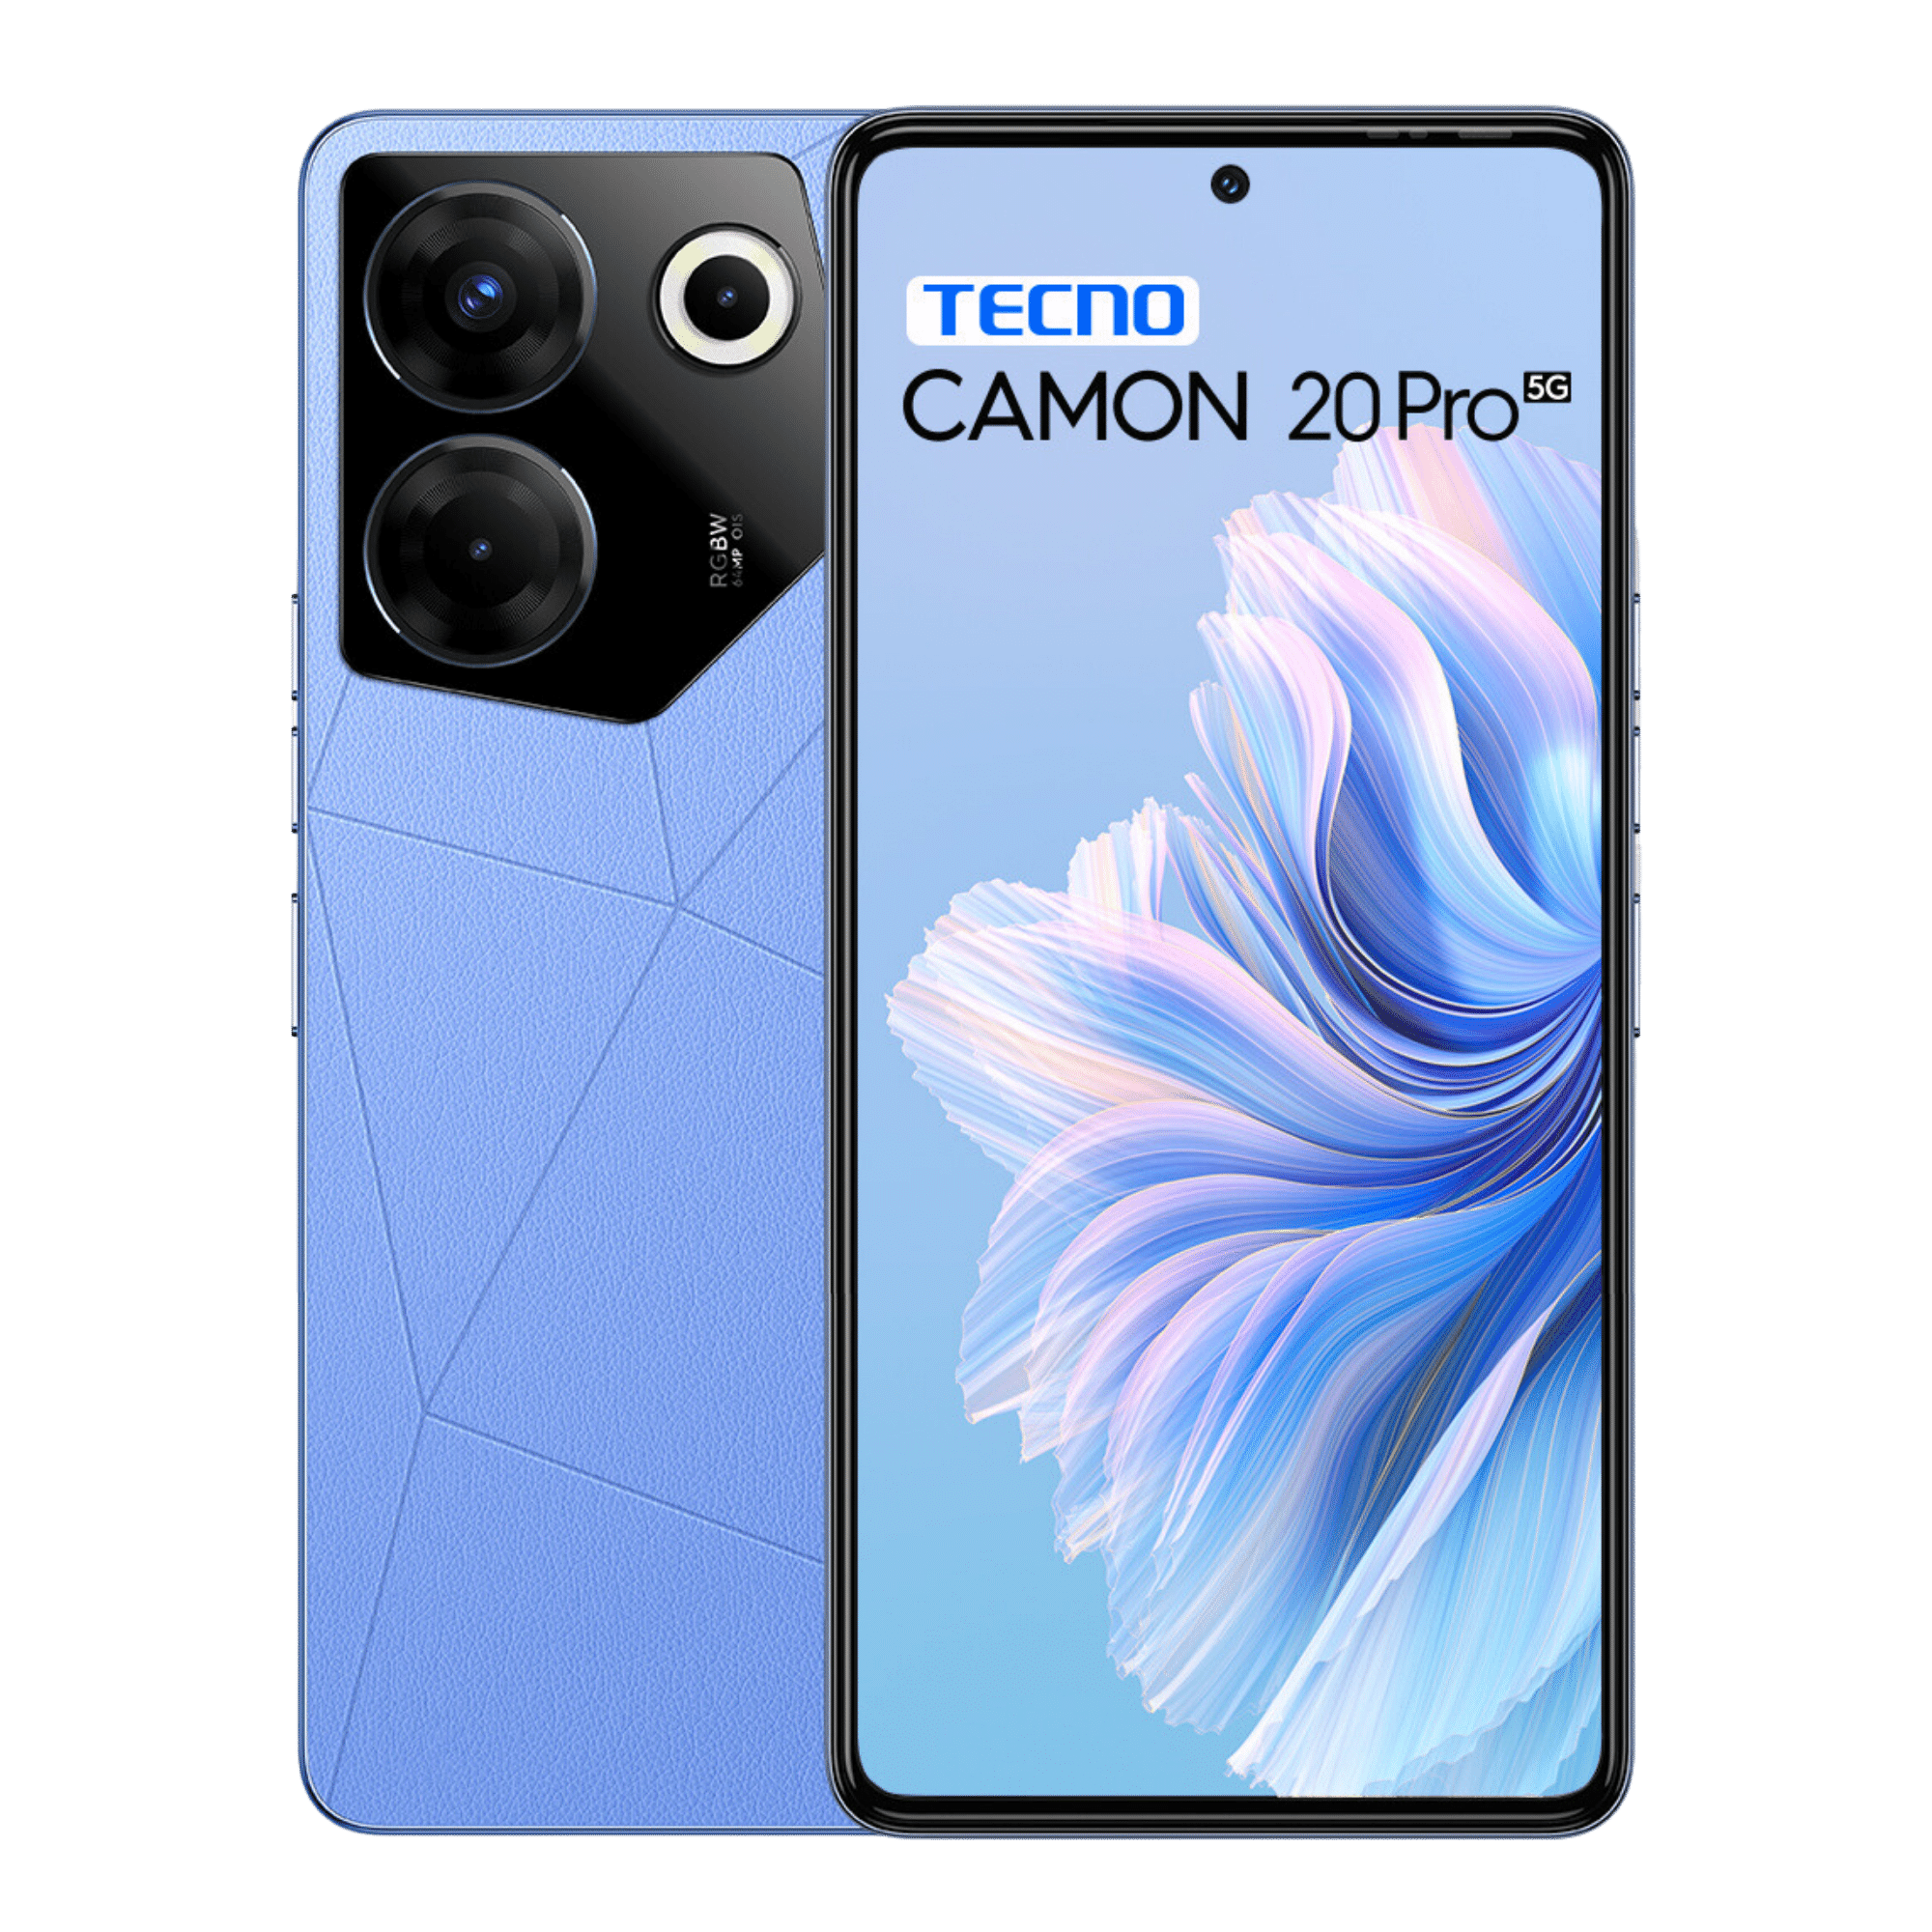 Elevate Your Visuals Buy Tecno Camon 20 Pro 5g At Poorvika 5170